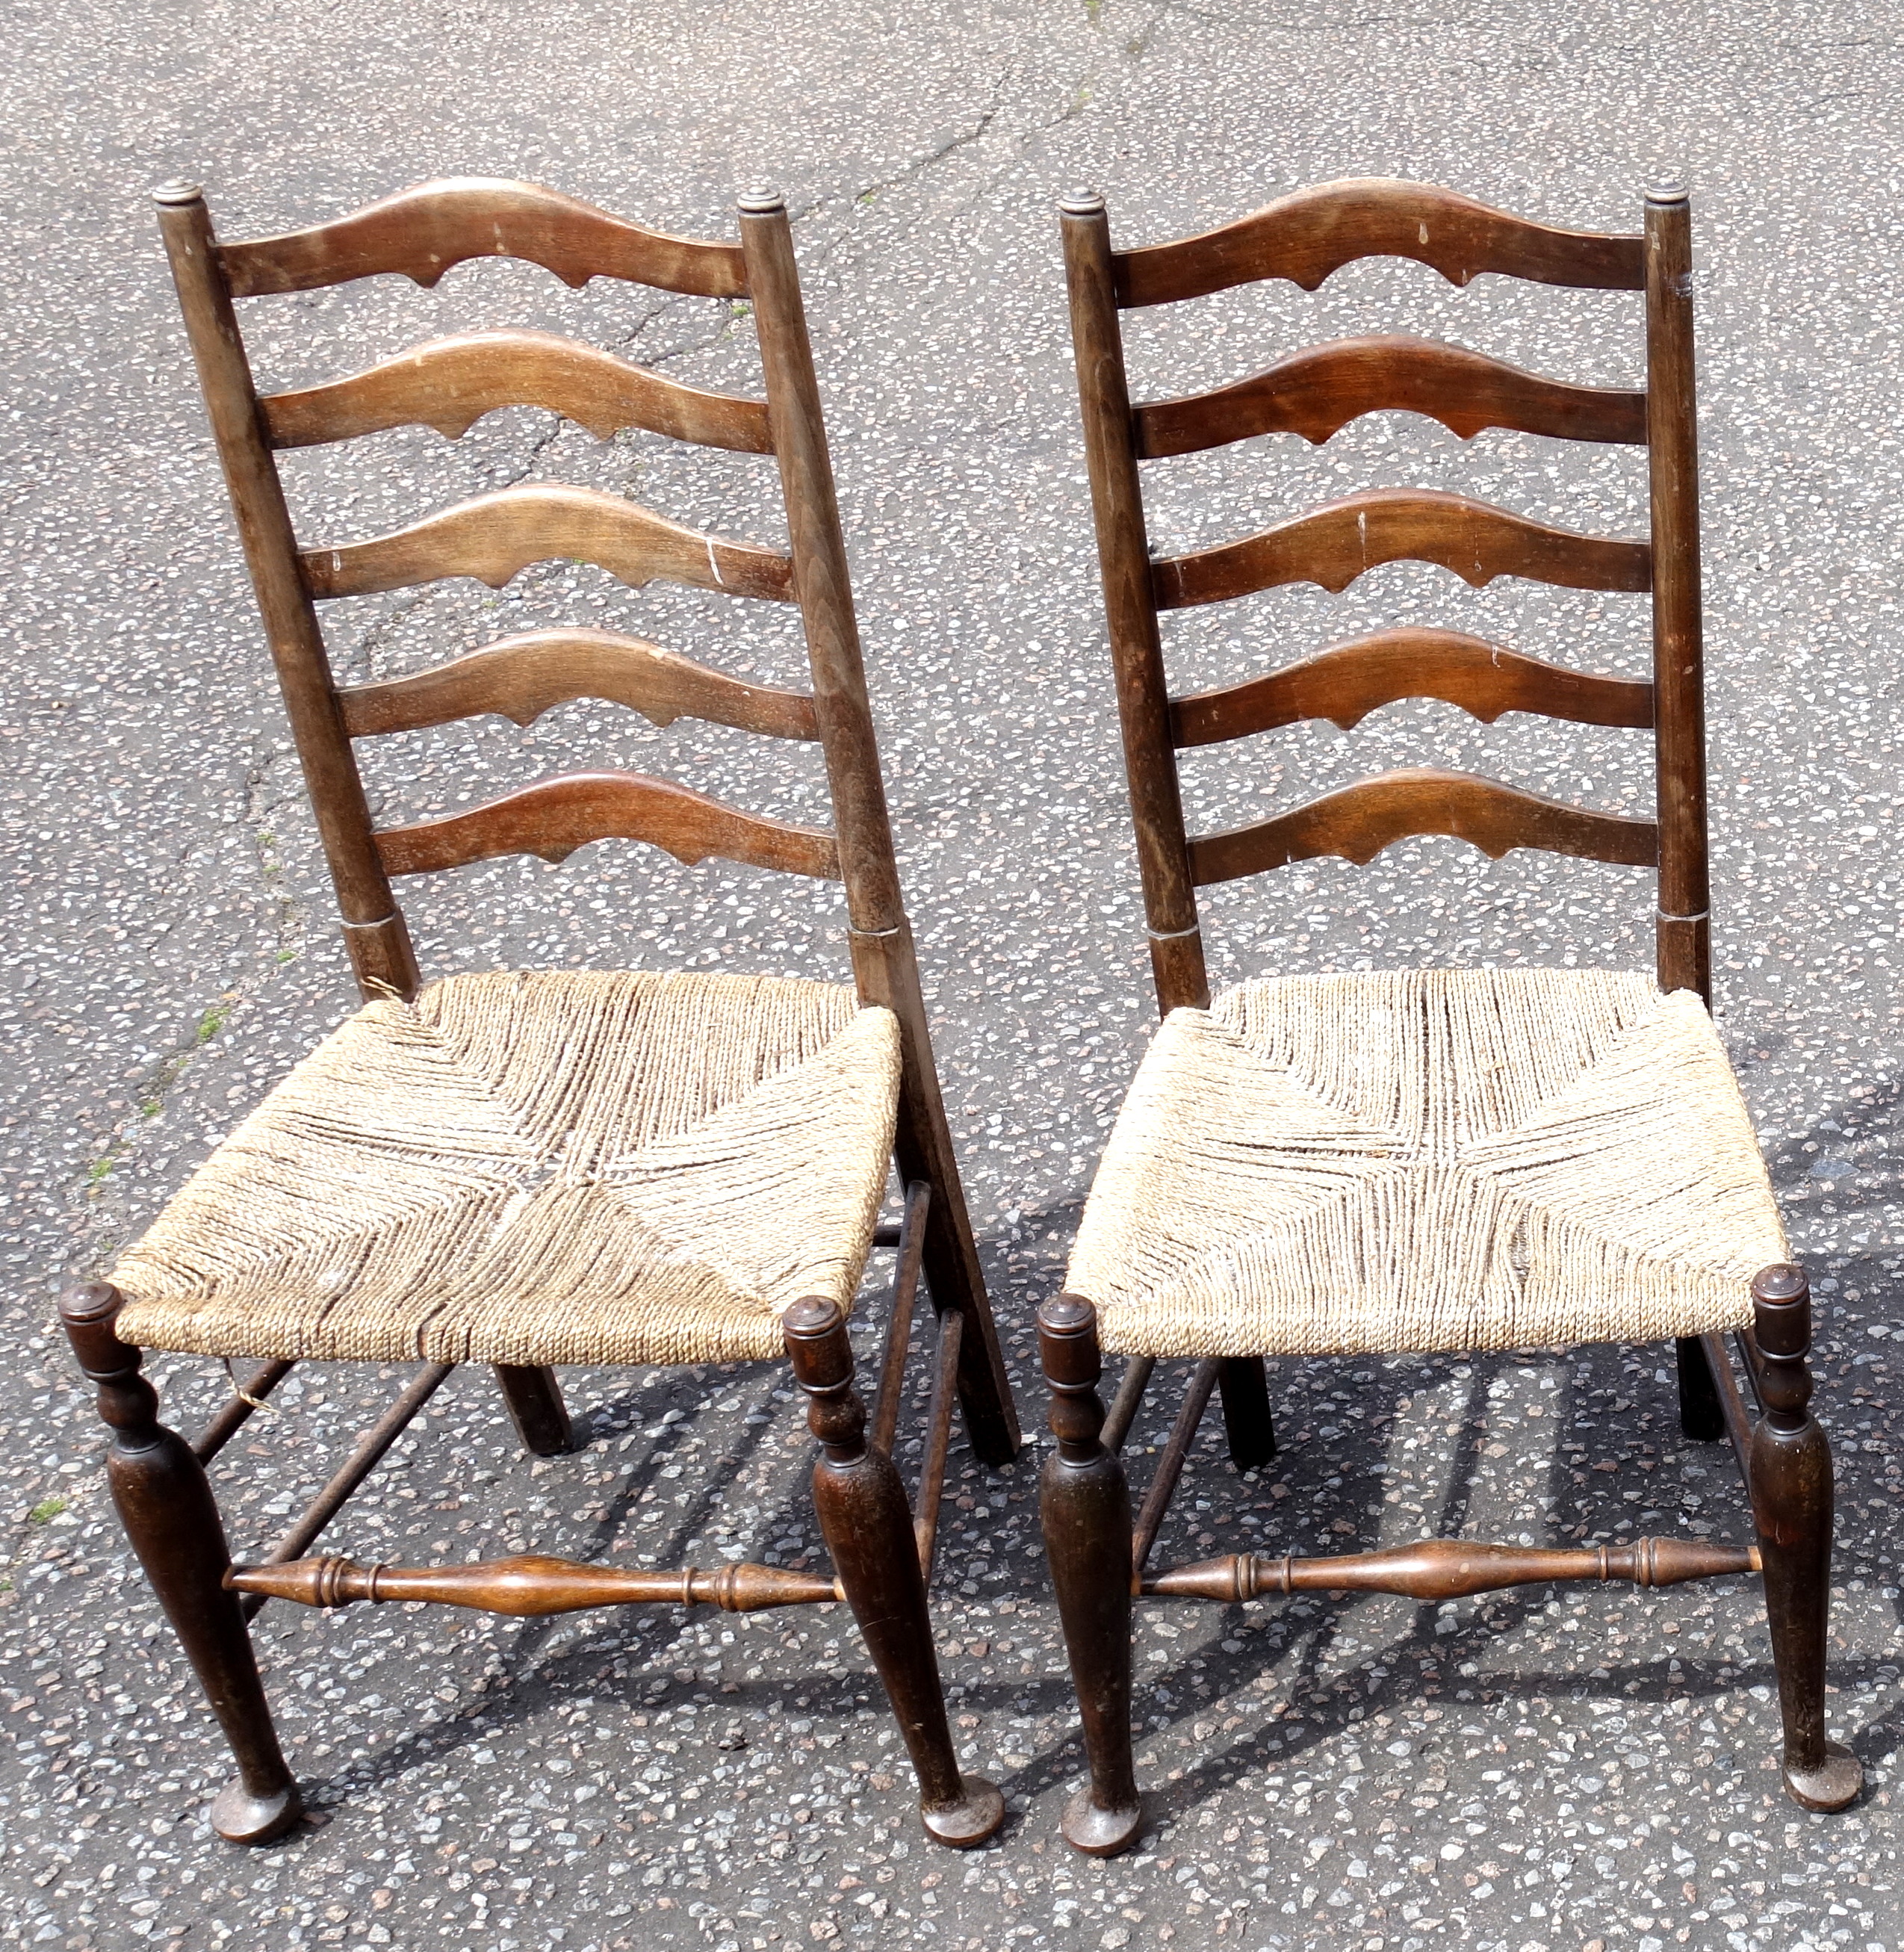 Pair of 2 Edwardian Yorkshire style beech chairs, each with a ladder back and seagrass seat